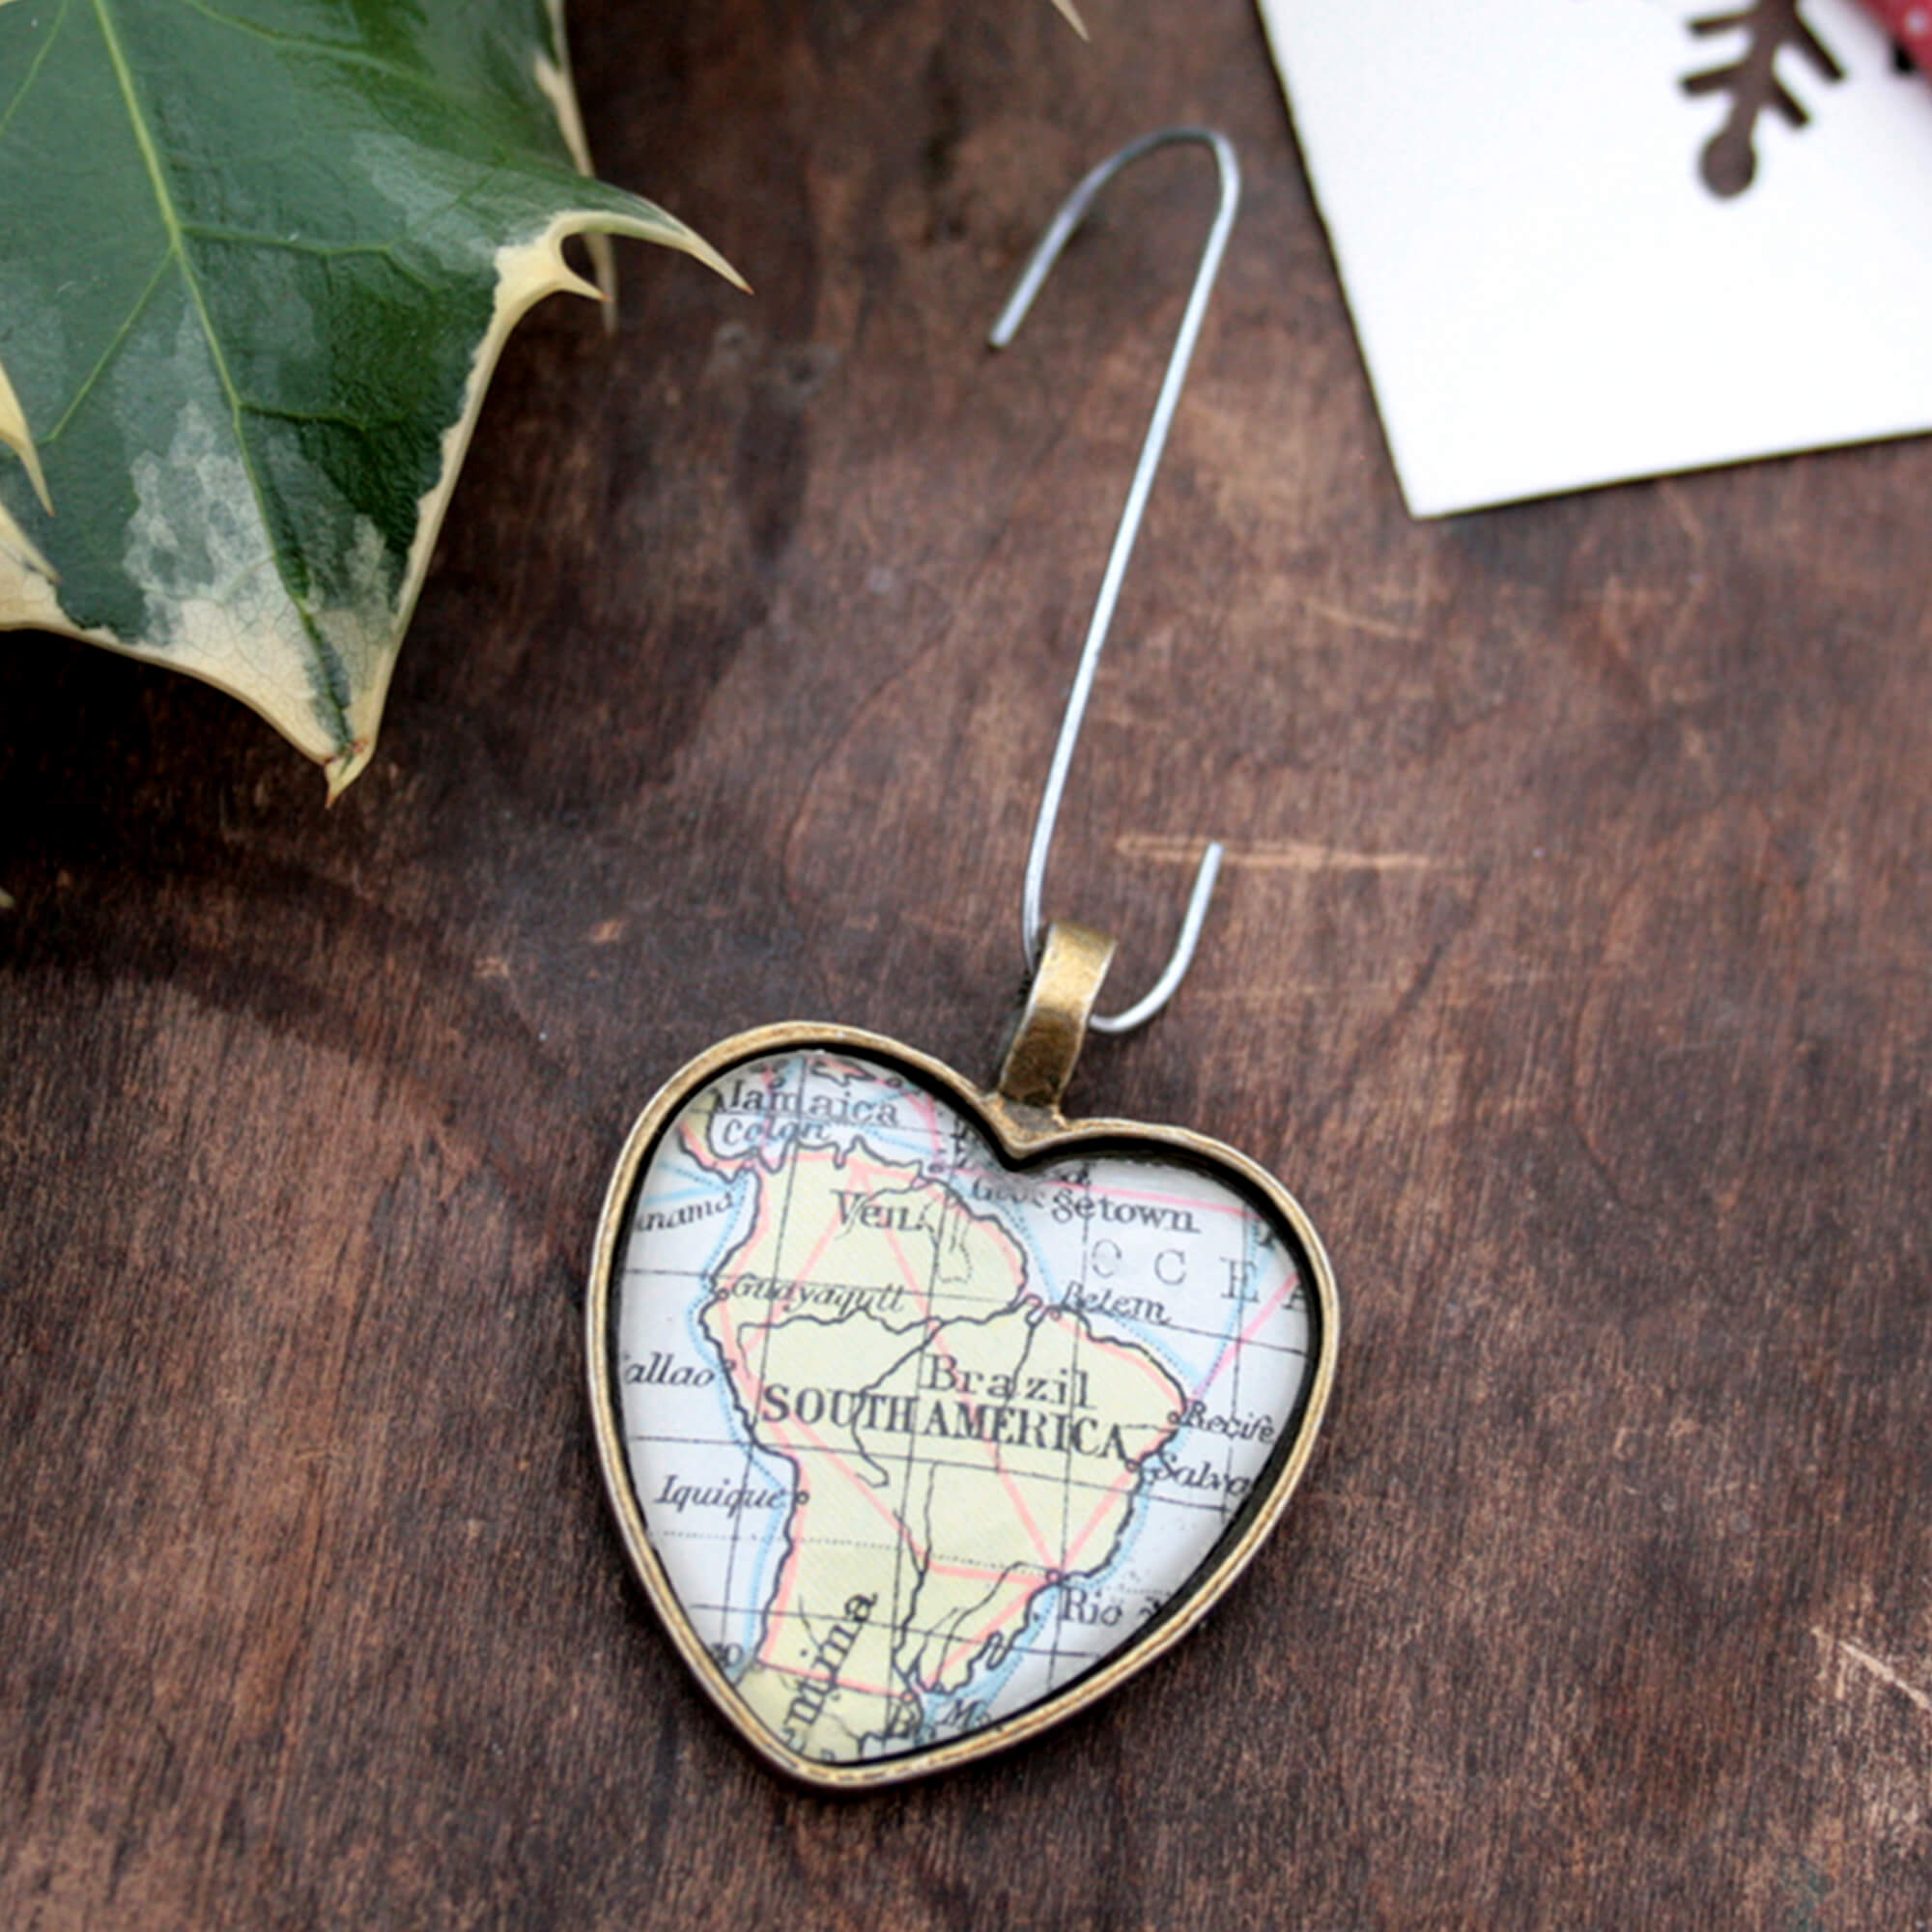 Christmas tree ornament in heart shape featuring map of the world